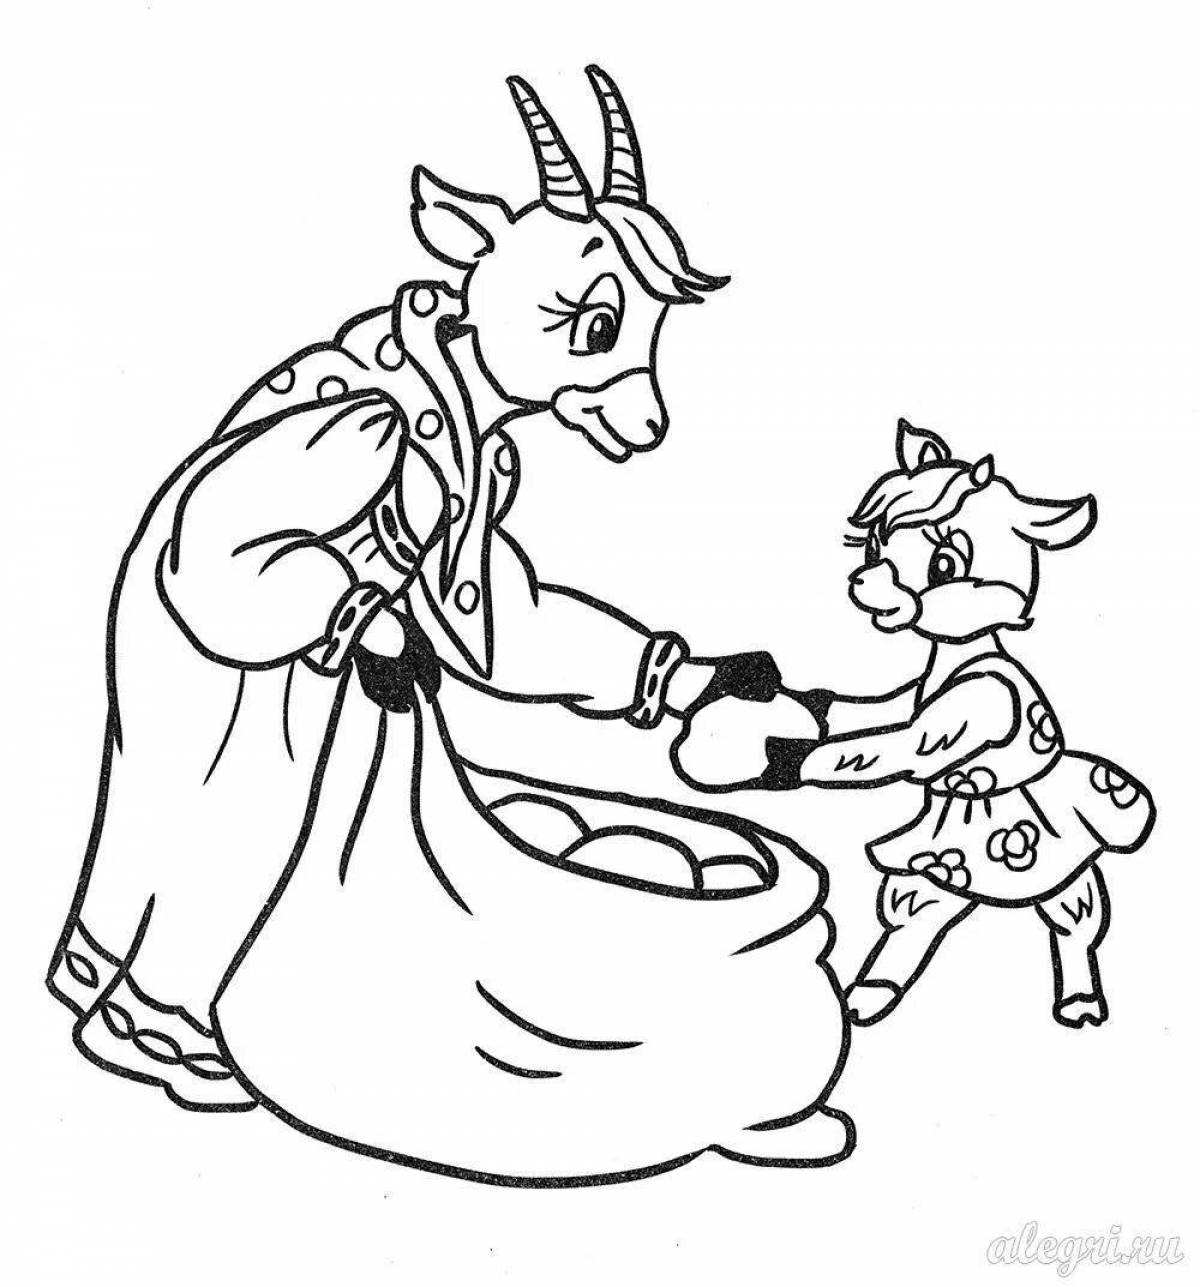 Adorable goat and seven kids coloring book